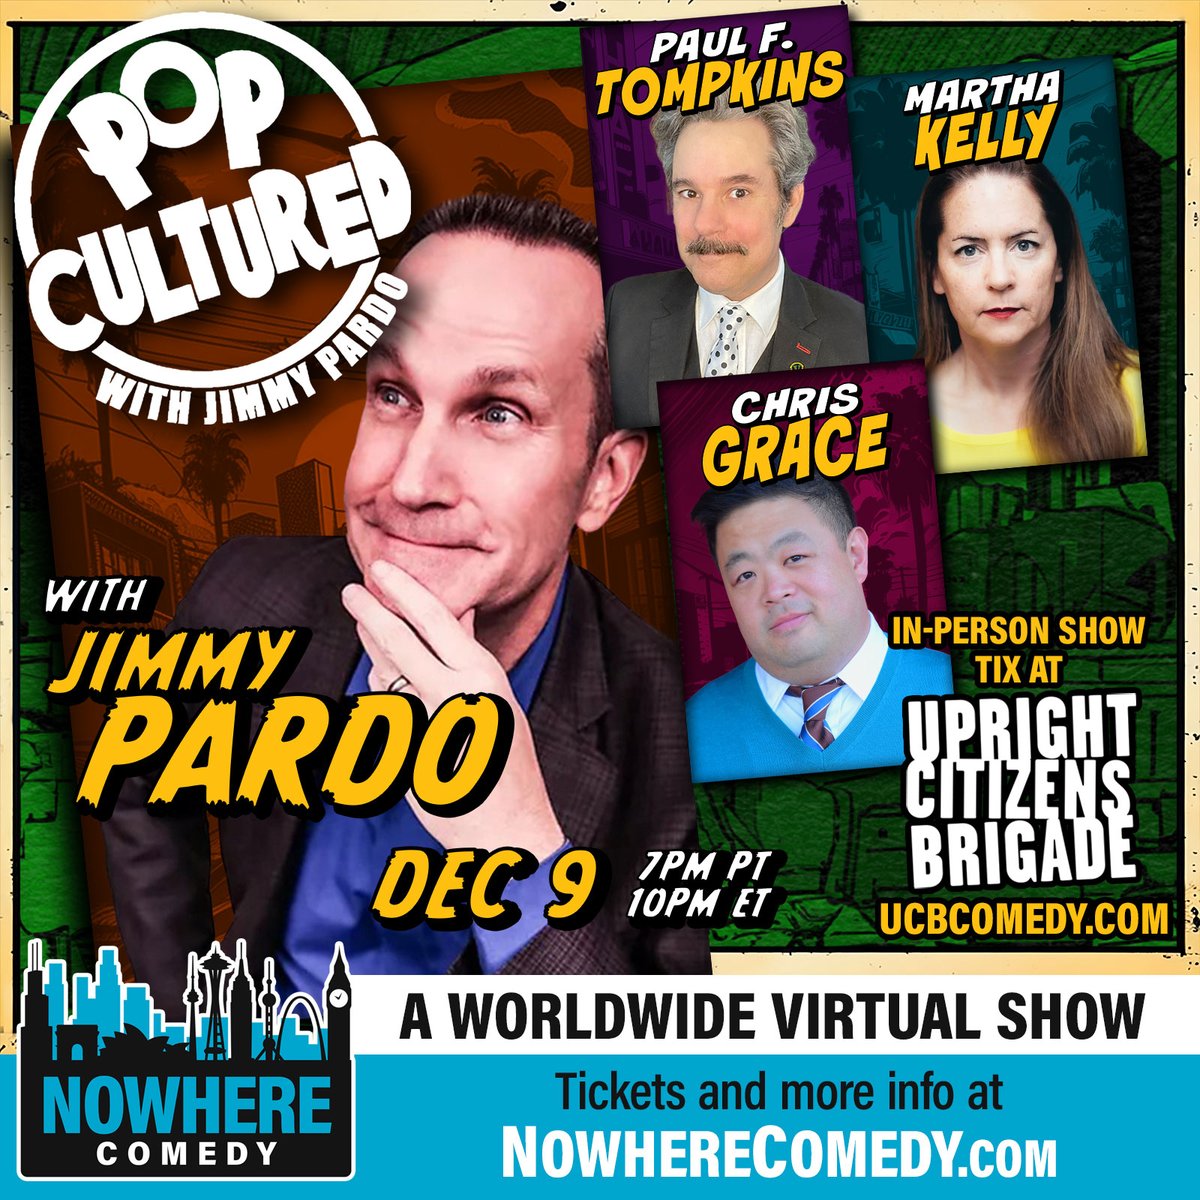 Pop Cultured with @jimmypardo, a night of comedy with @PFTompkins, @ChrisGrace, #MarthaKelly! It's a night of laughter & fun you won't want to miss: NowhereComedy.com